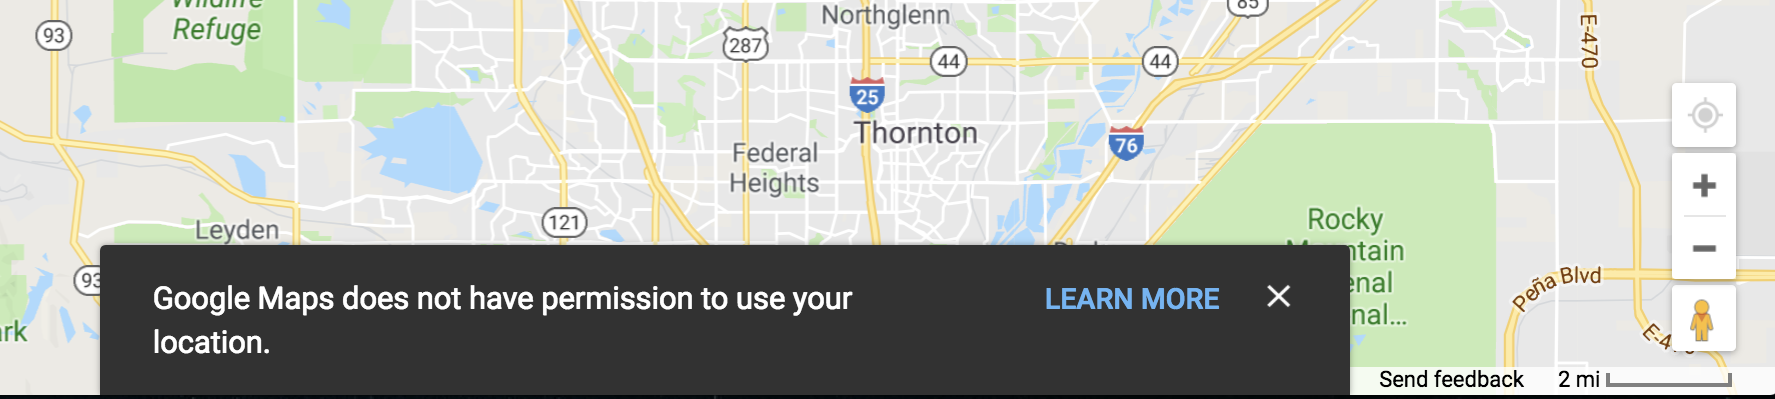 google maps does not have permission to use your location